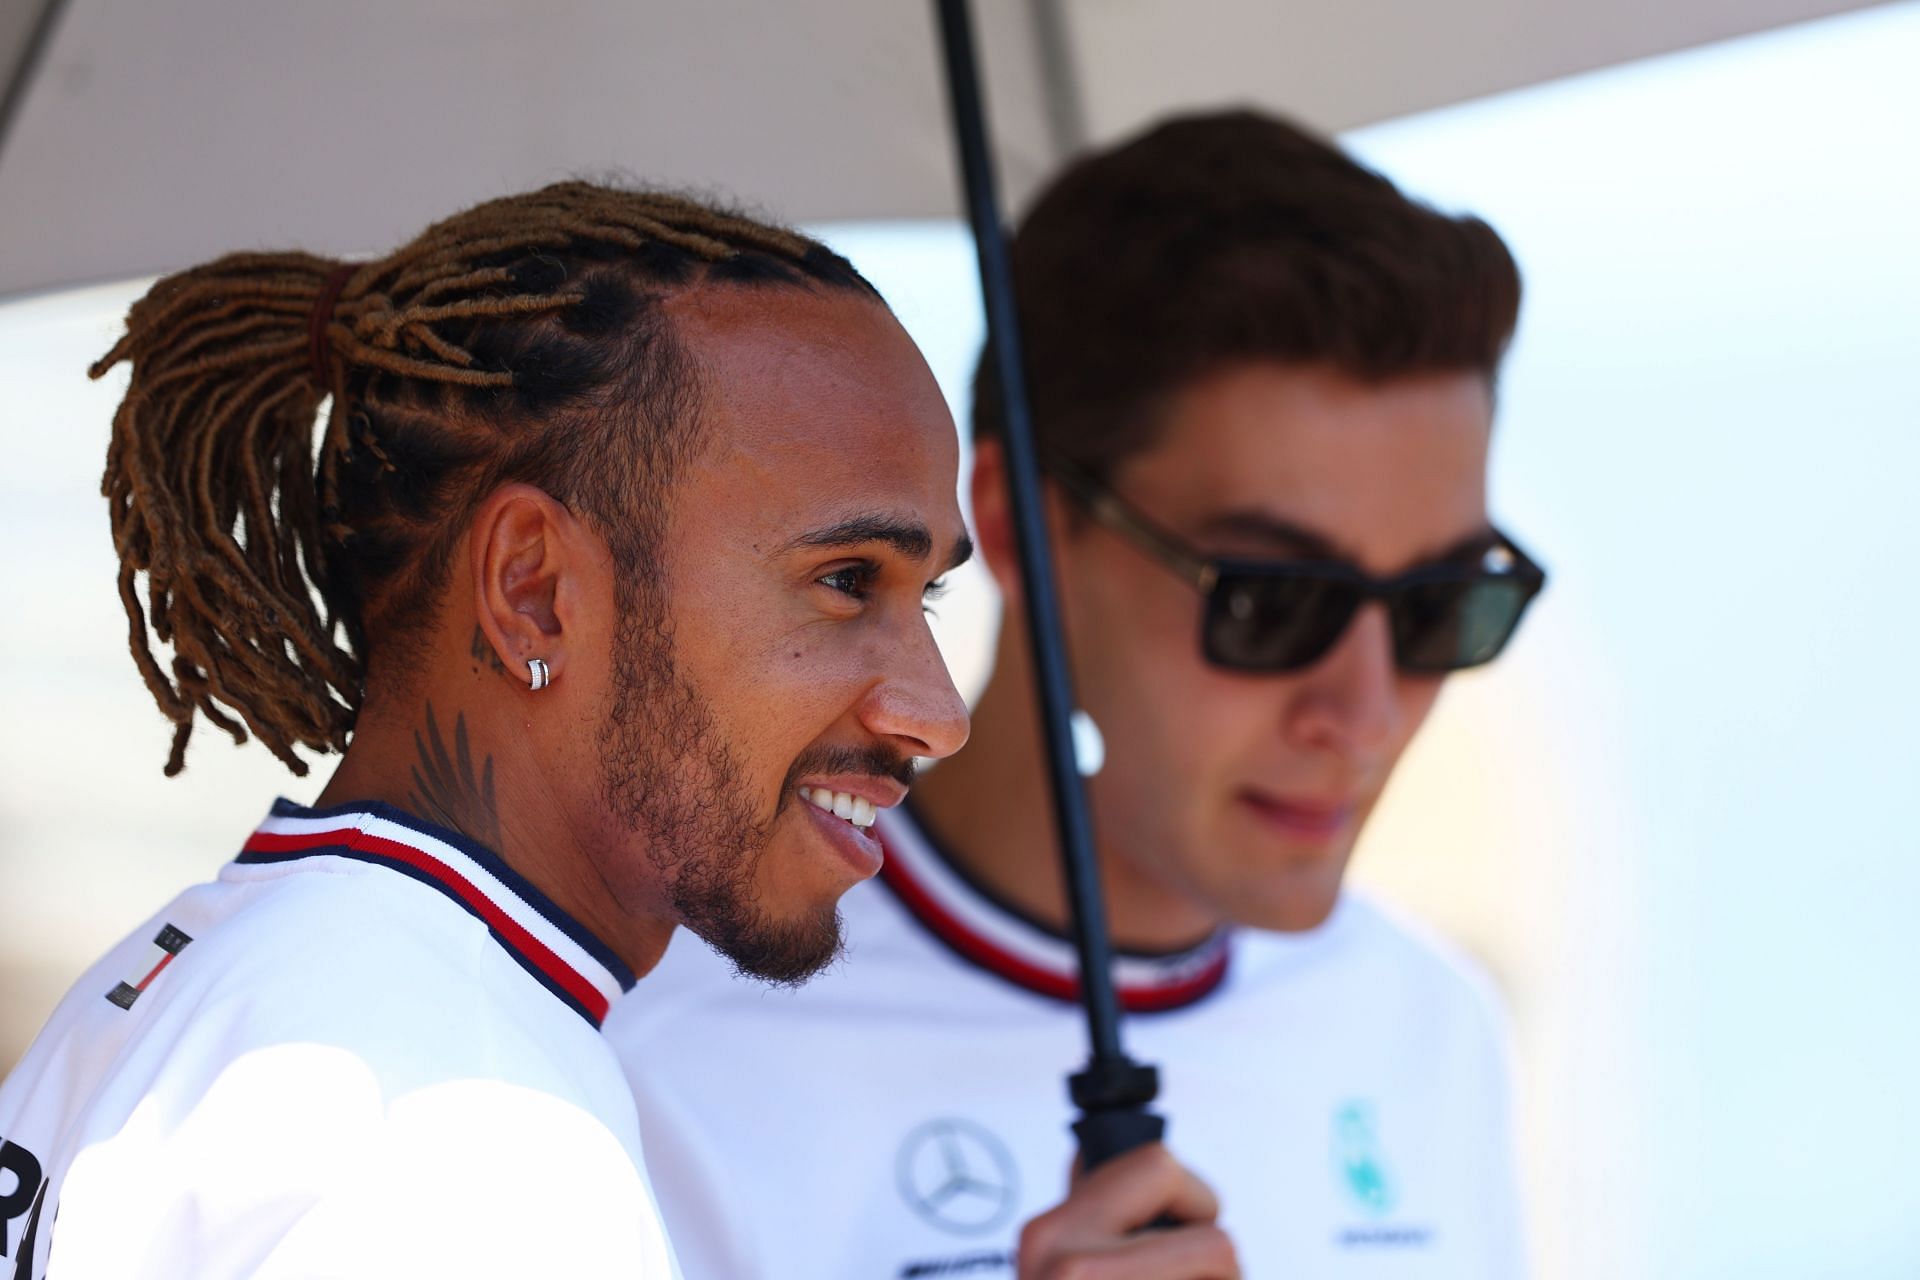 Lewis Hamilton is the only GOAT in the world of motorsports right now unlike in tennis, says George Russell